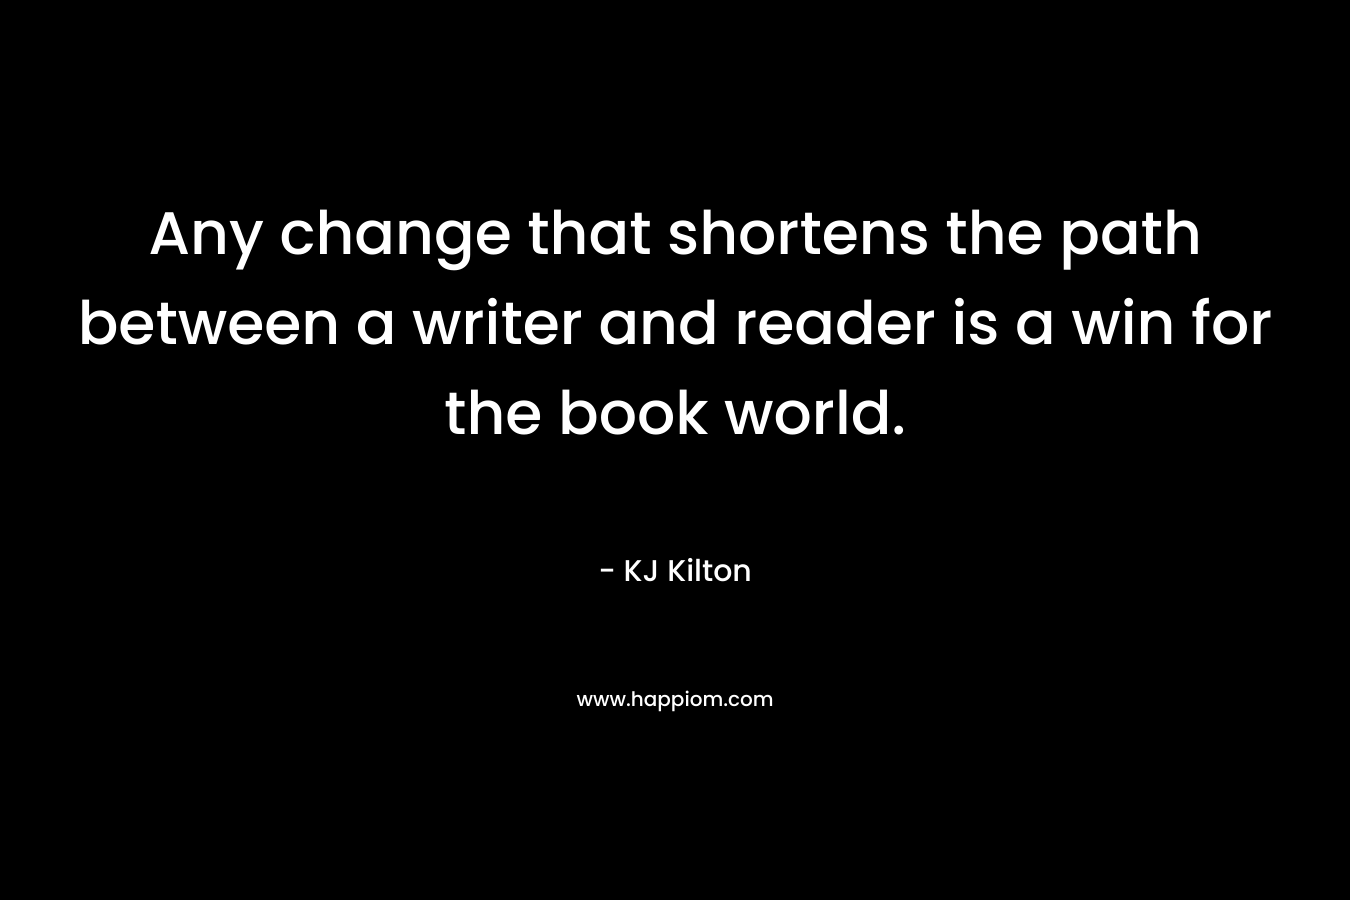 Any change that shortens the path between a writer and reader is a win for the book world. – KJ Kilton